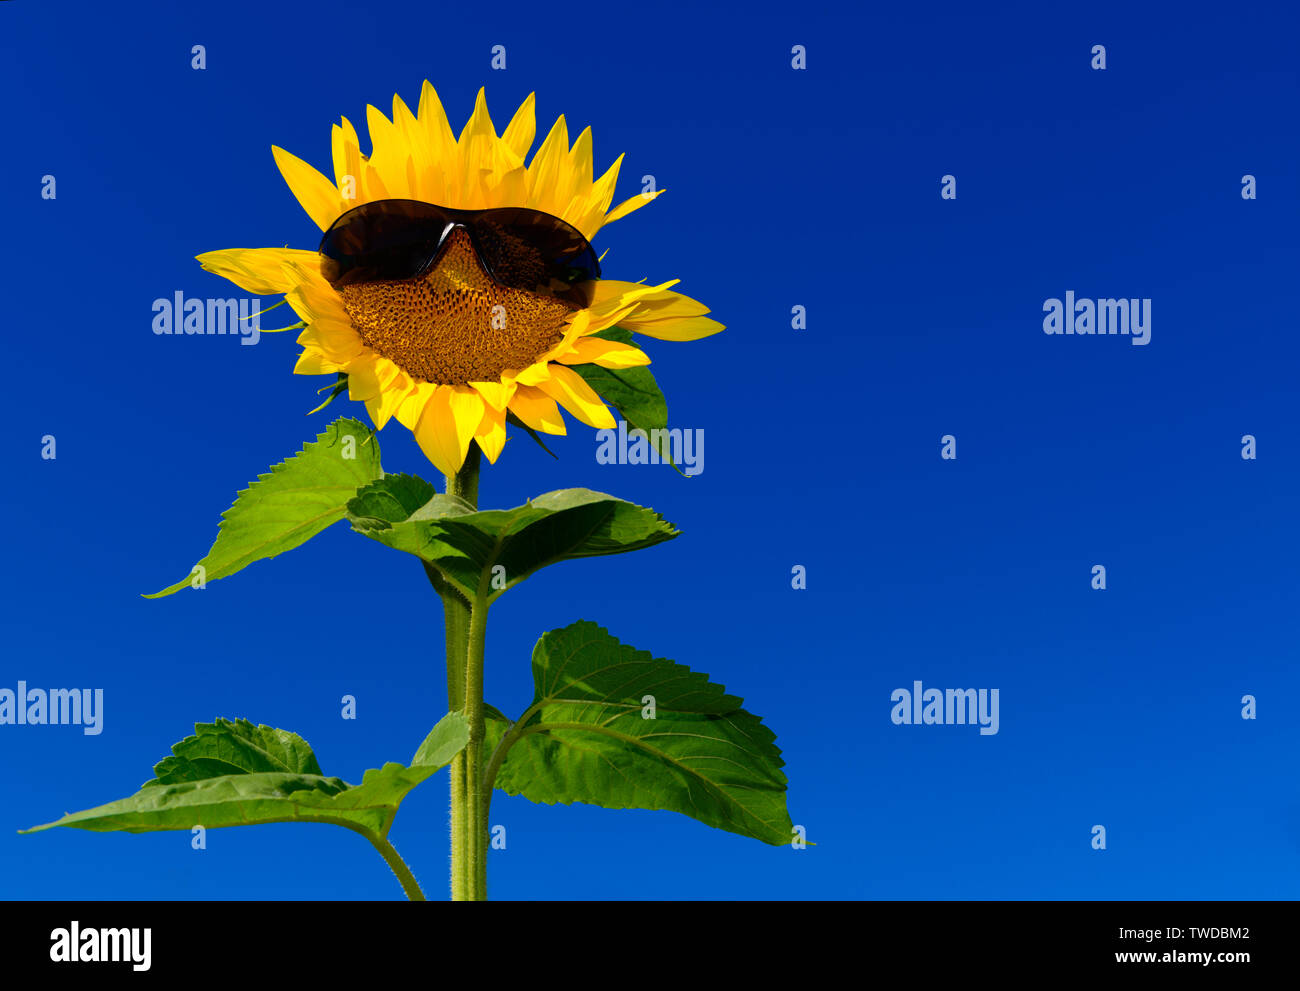 Funny isolated sunflower wearing sunglasses against deep blue sky Stock Photo